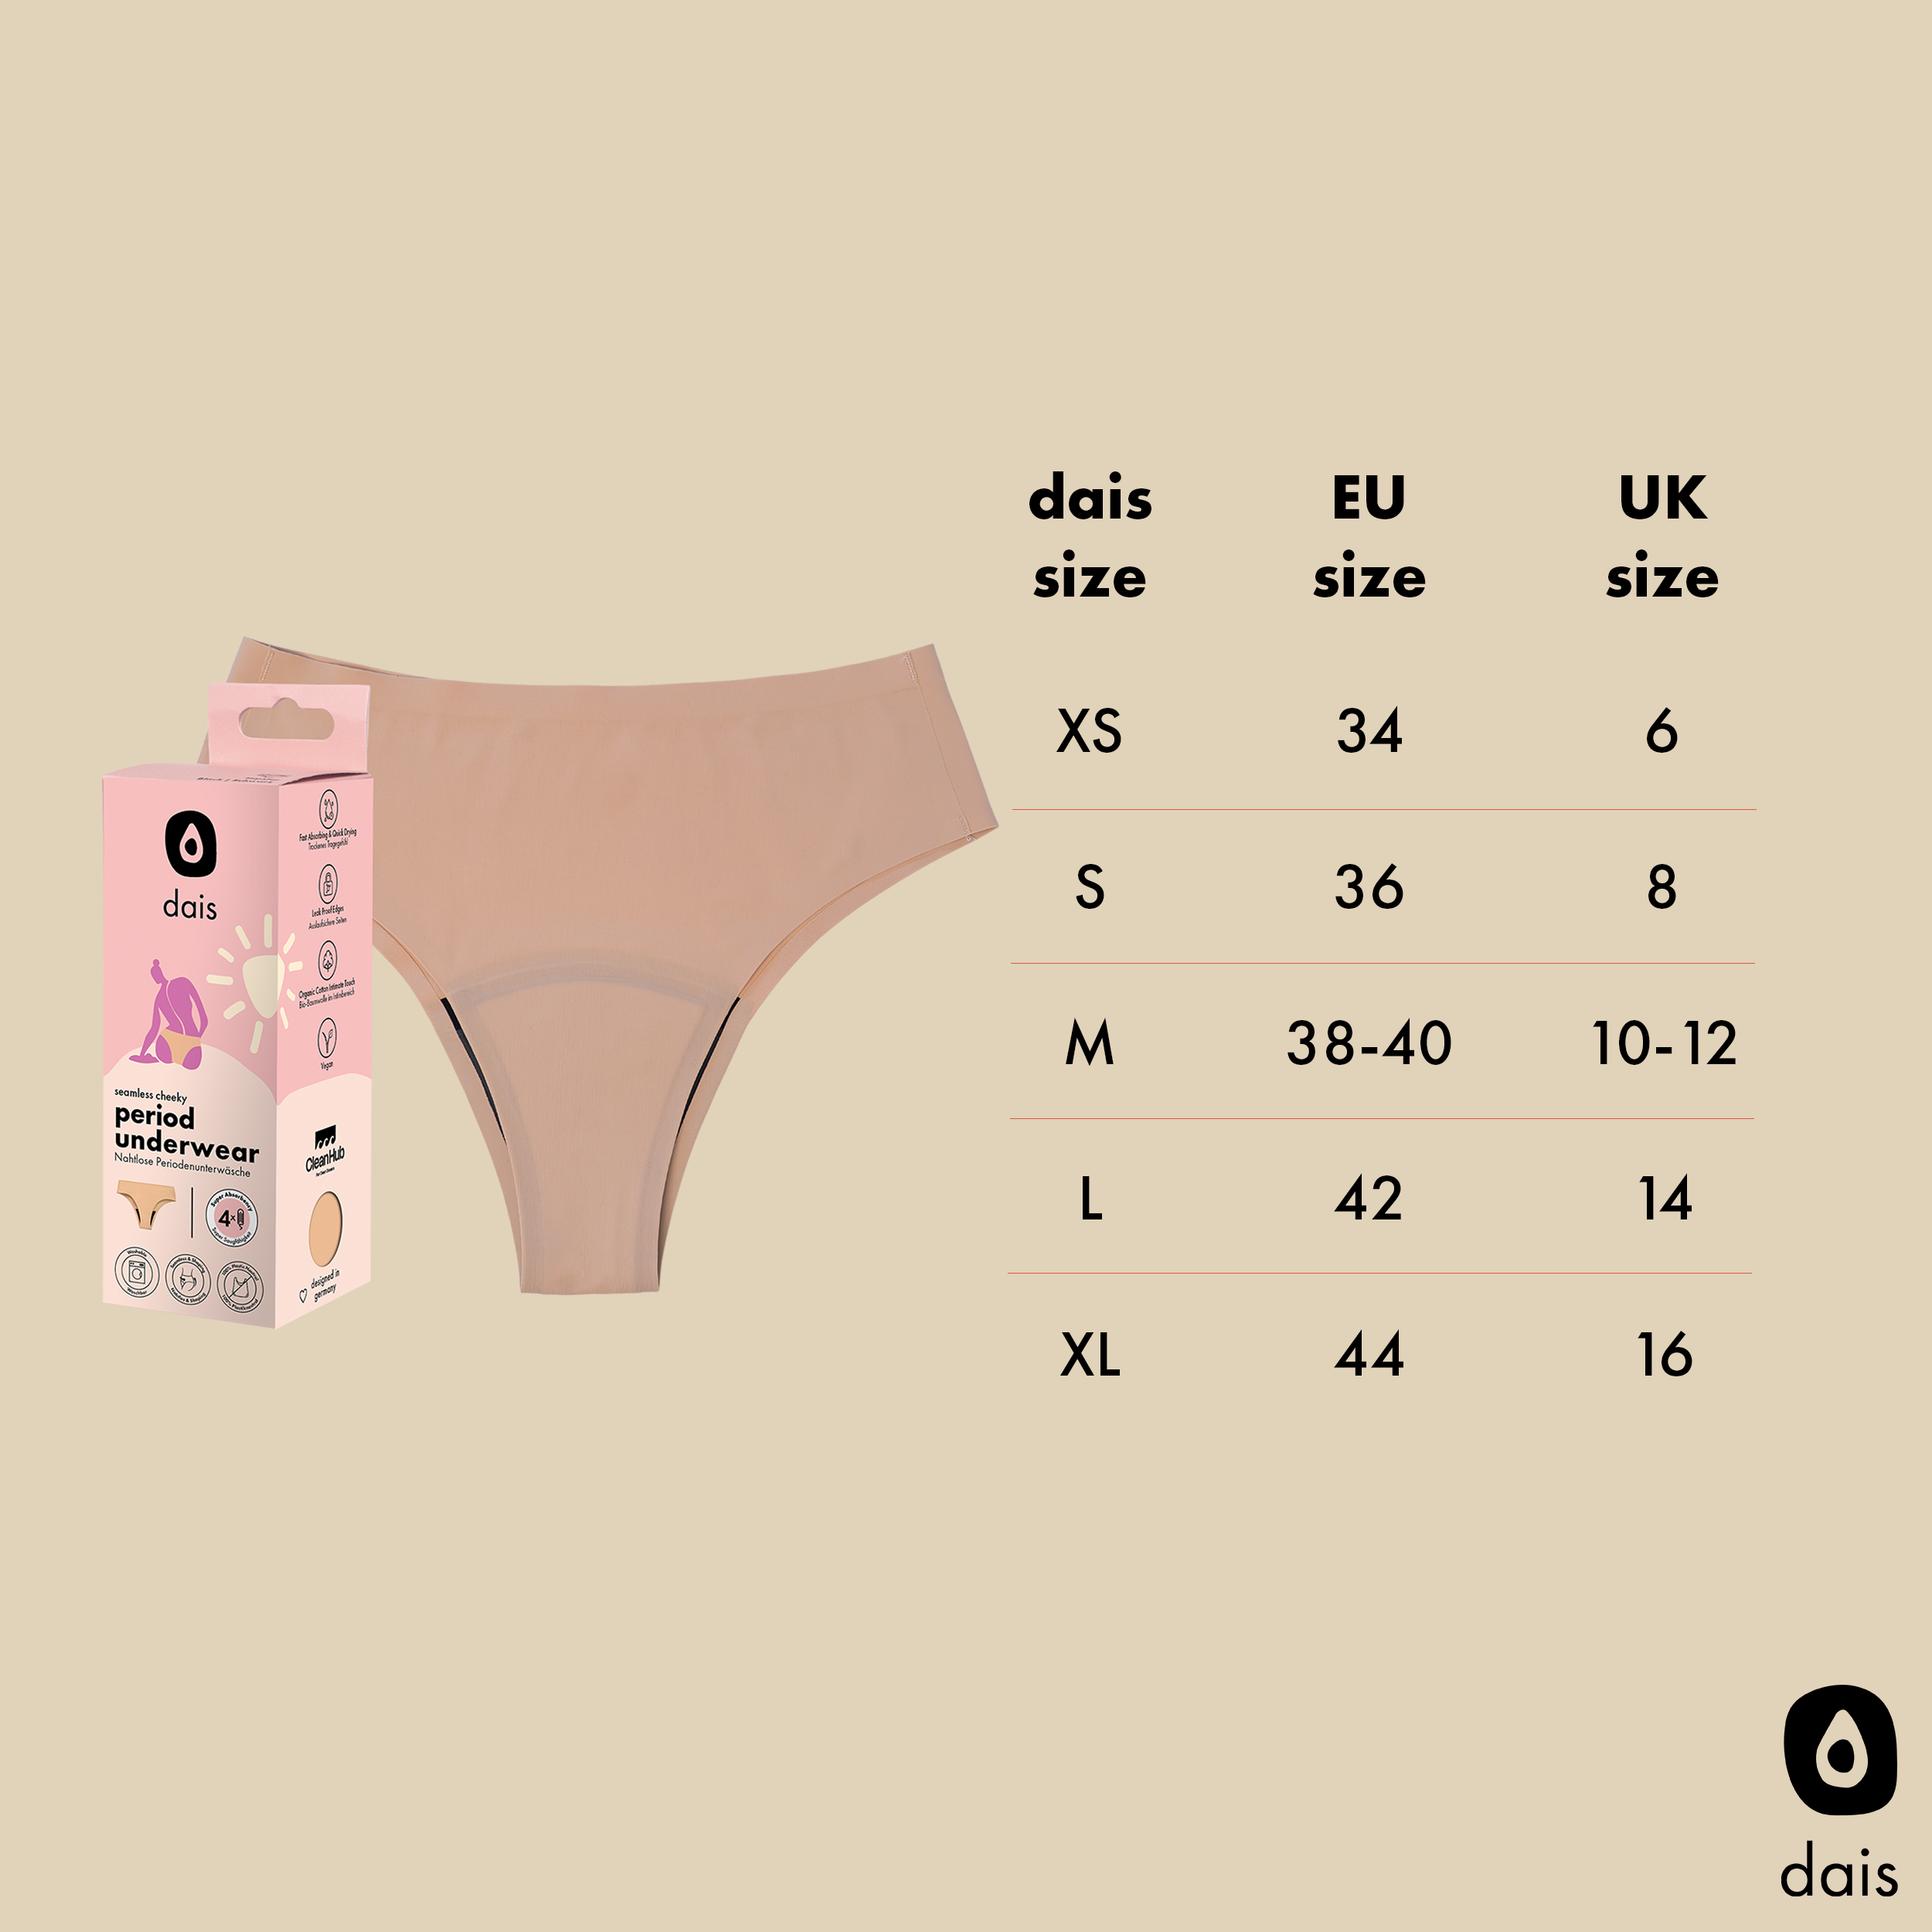 Size chart for dais period underwear cheeky in beige showing size options of XS, S, M, L and XL and the EU and UK size conversions. 